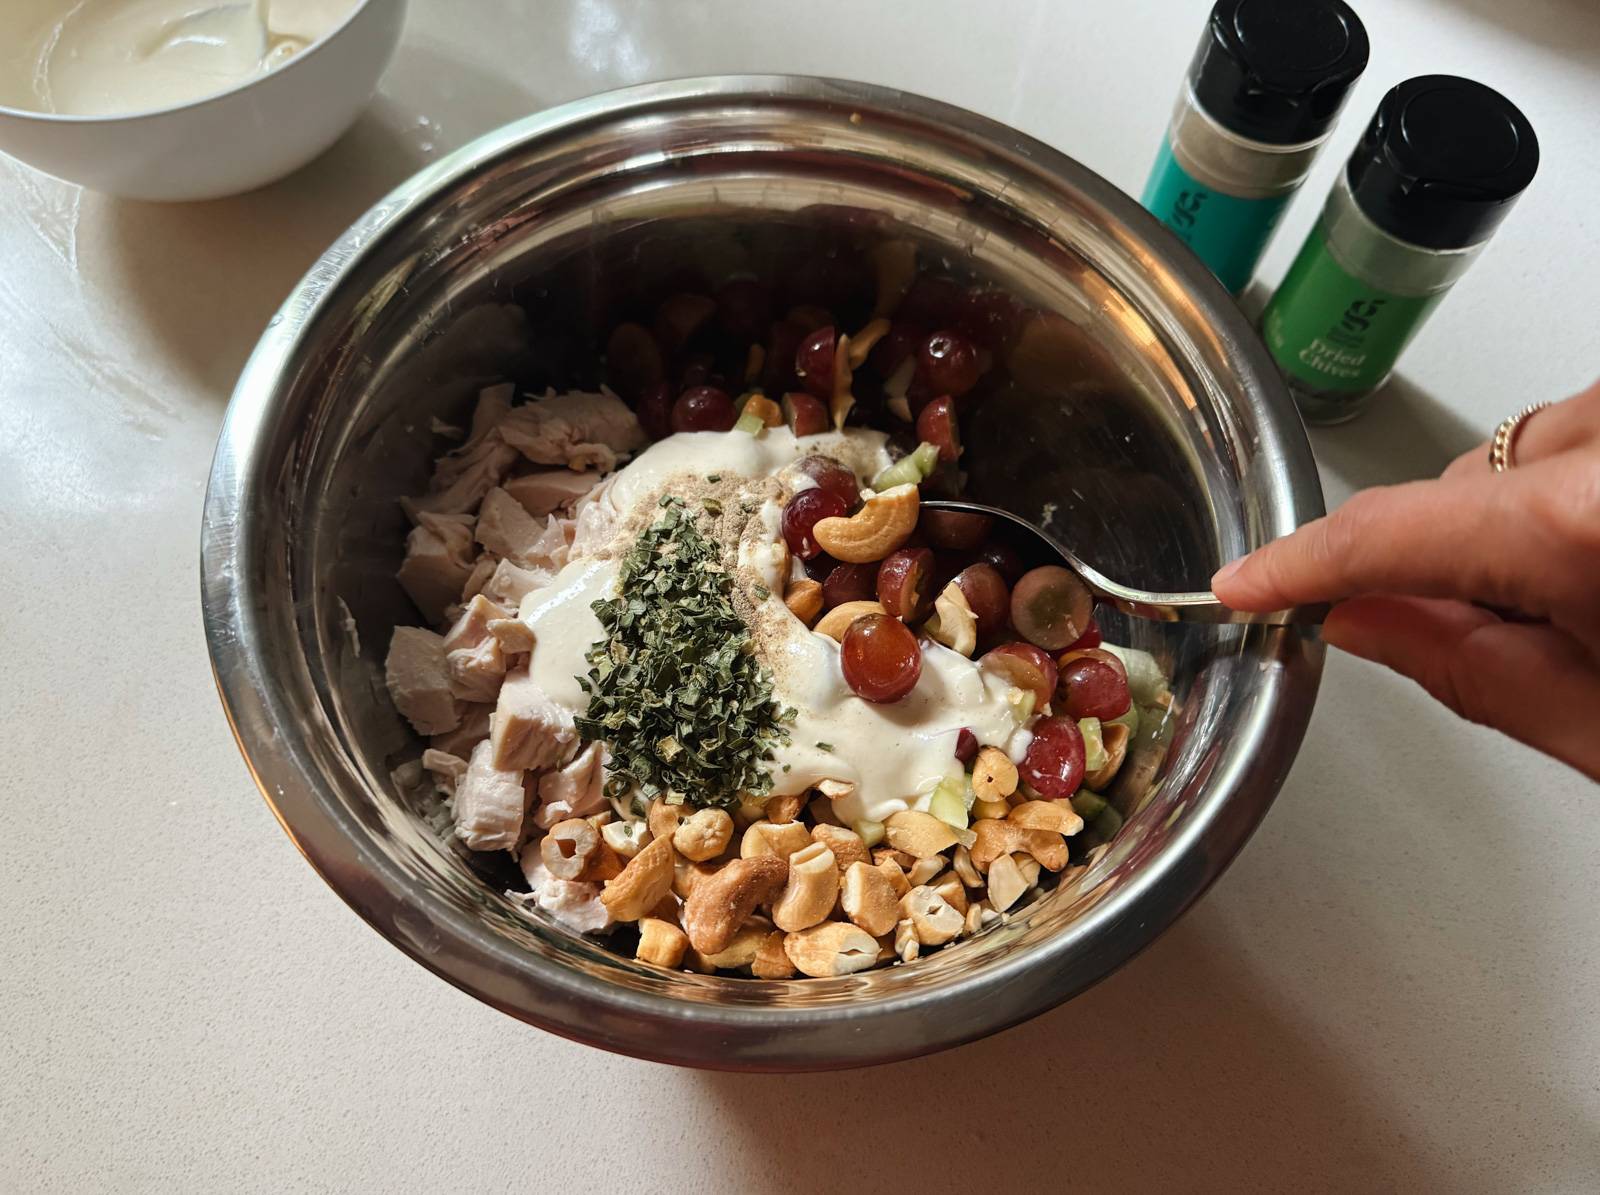 Mixing chicken salad ingredients in a large bowl.